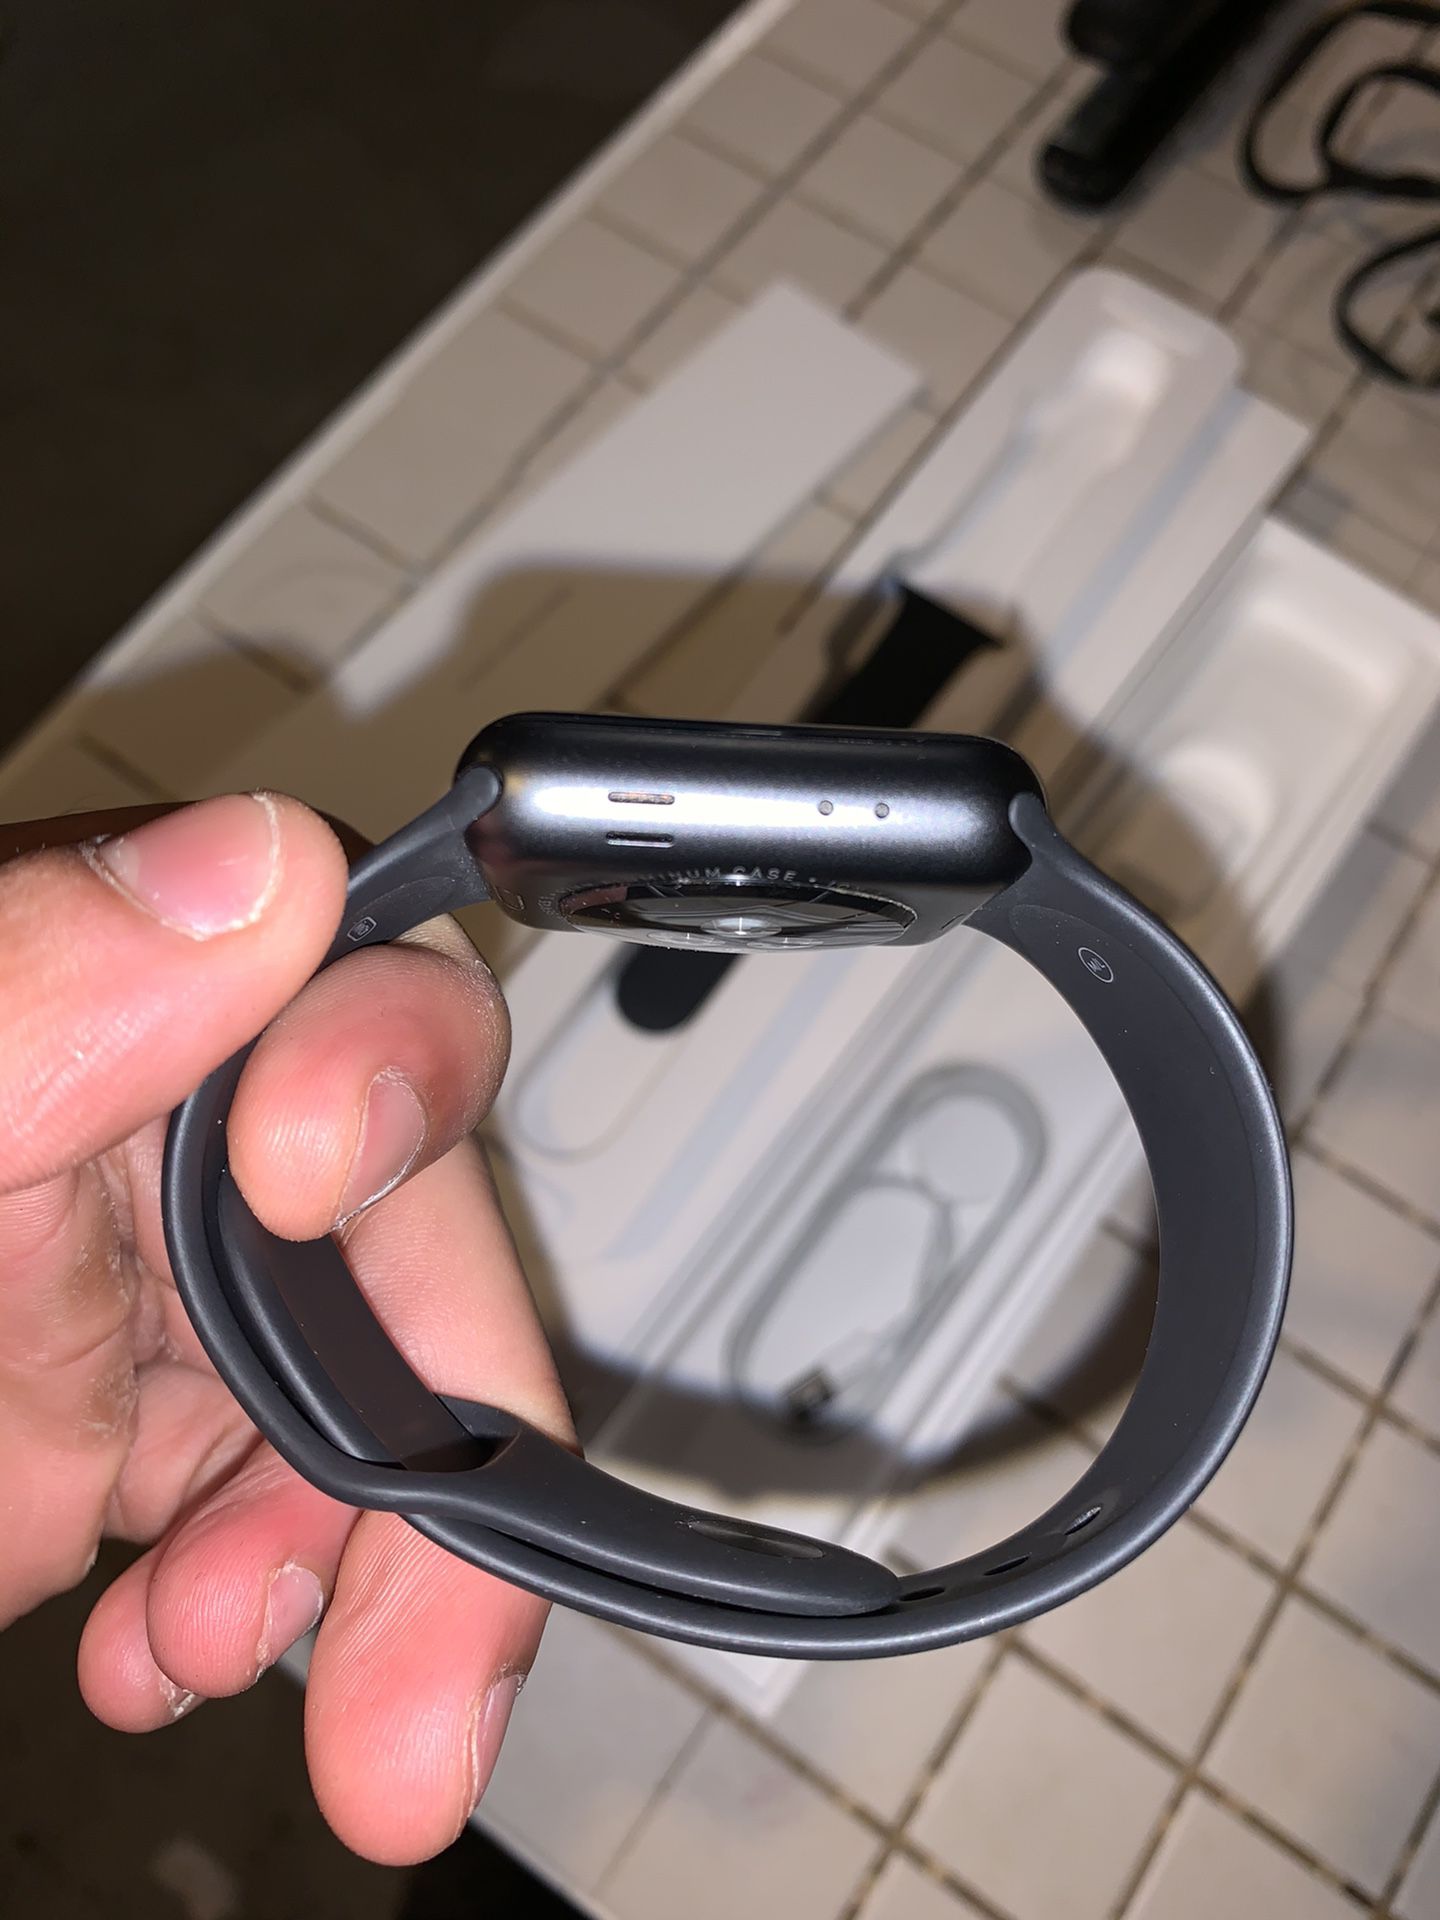 Apple Watch Serie 3 for sell o trade